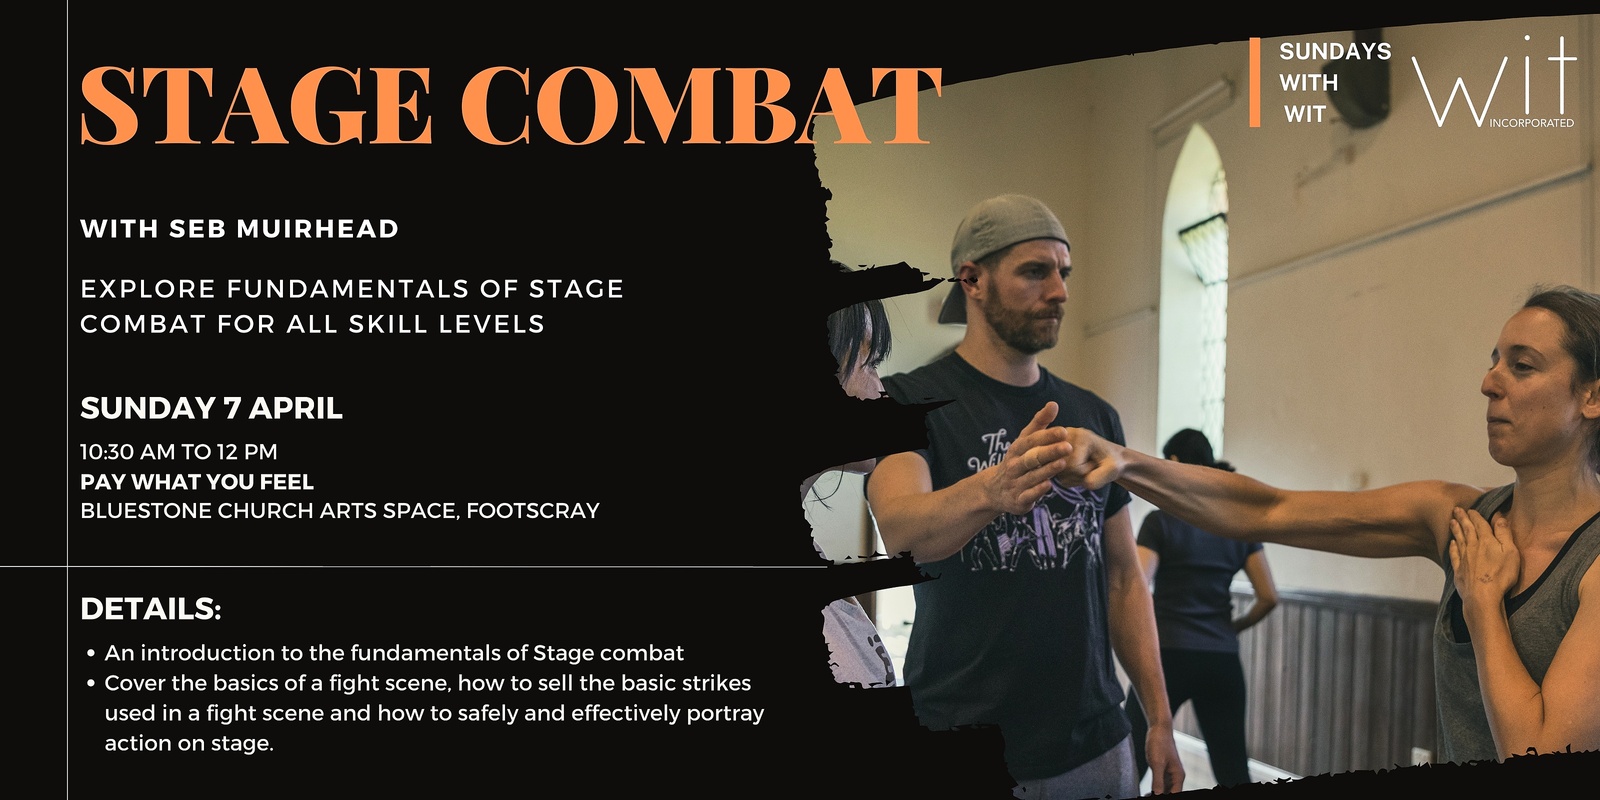 Banner image for Sundays with Wit - Fundamental Introduction to Stage Combat